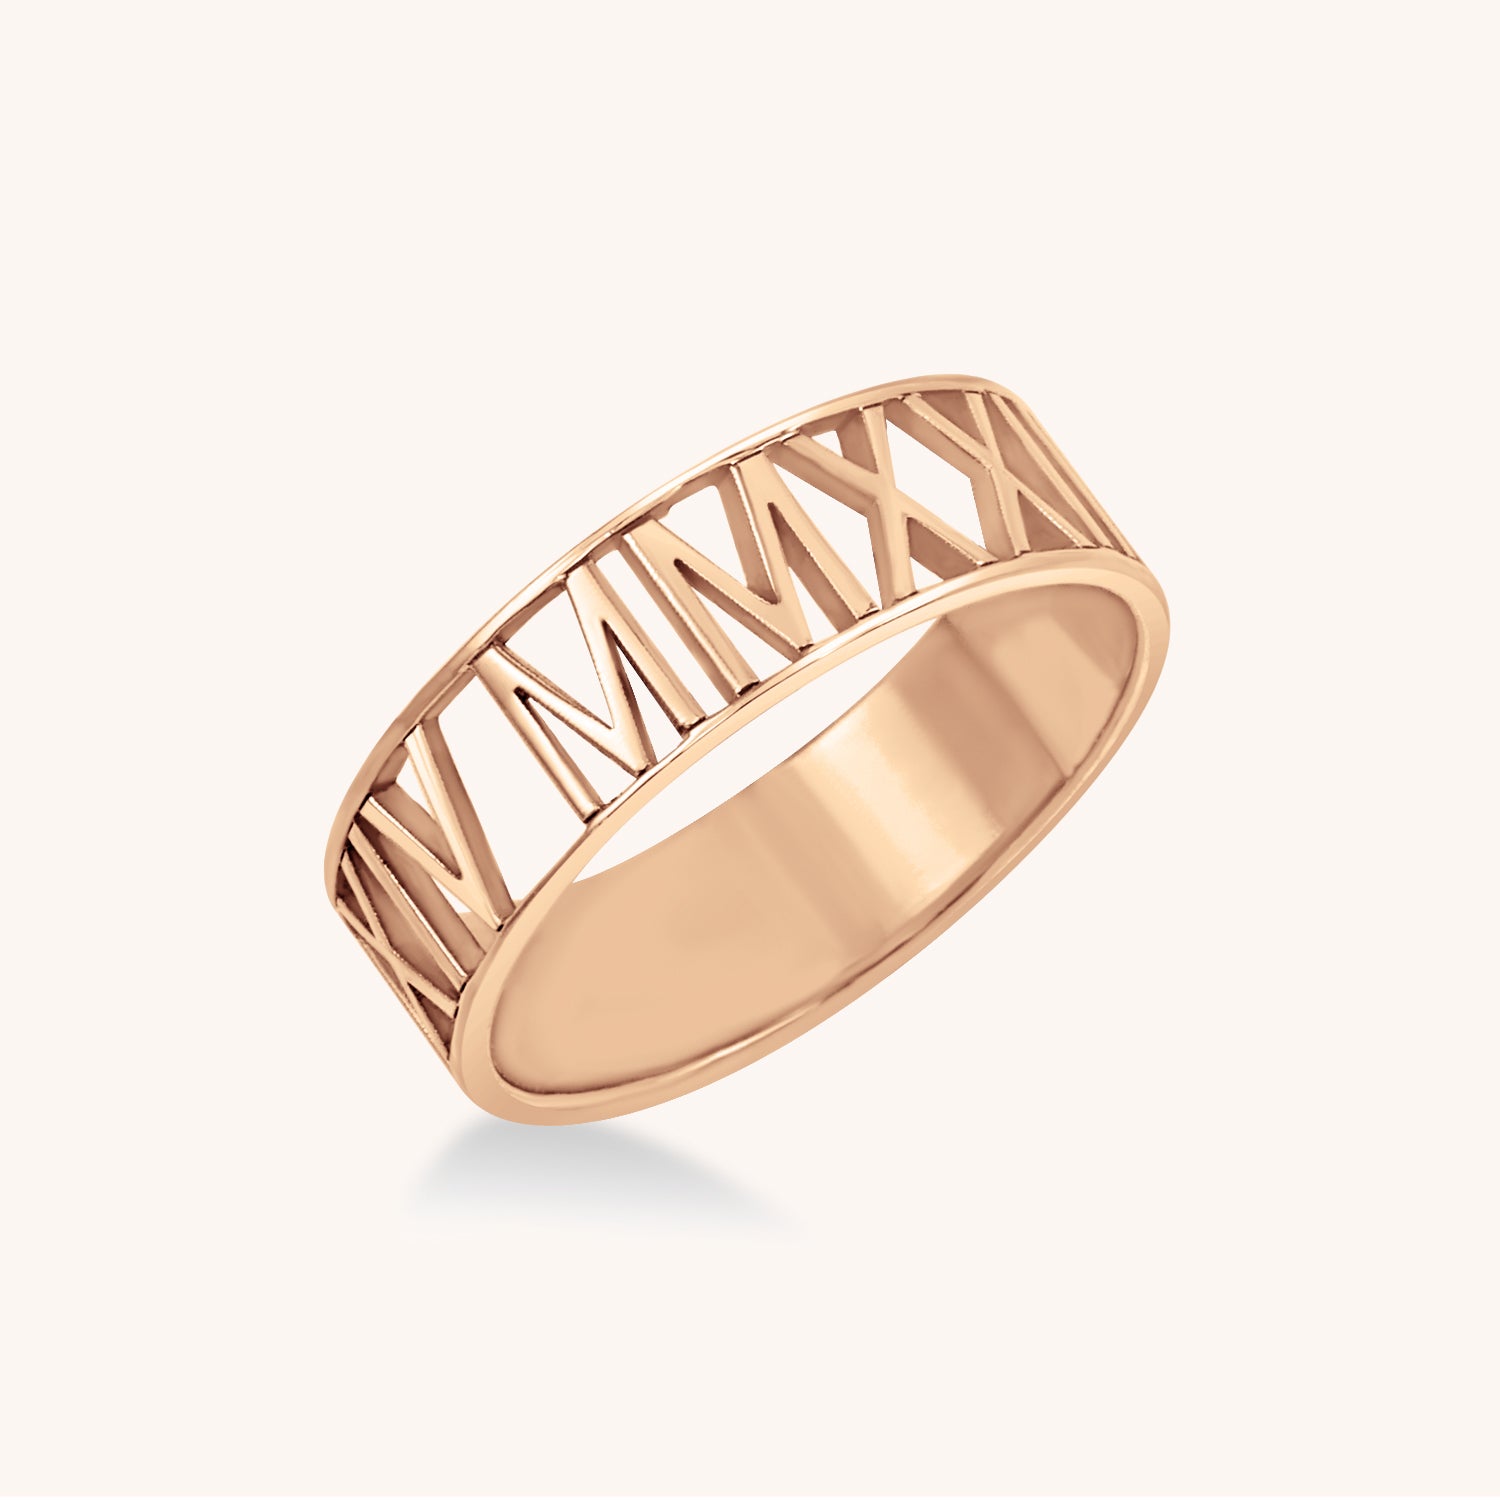 Large 10K Gold Roman Numeral Ring – Be Monogrammed